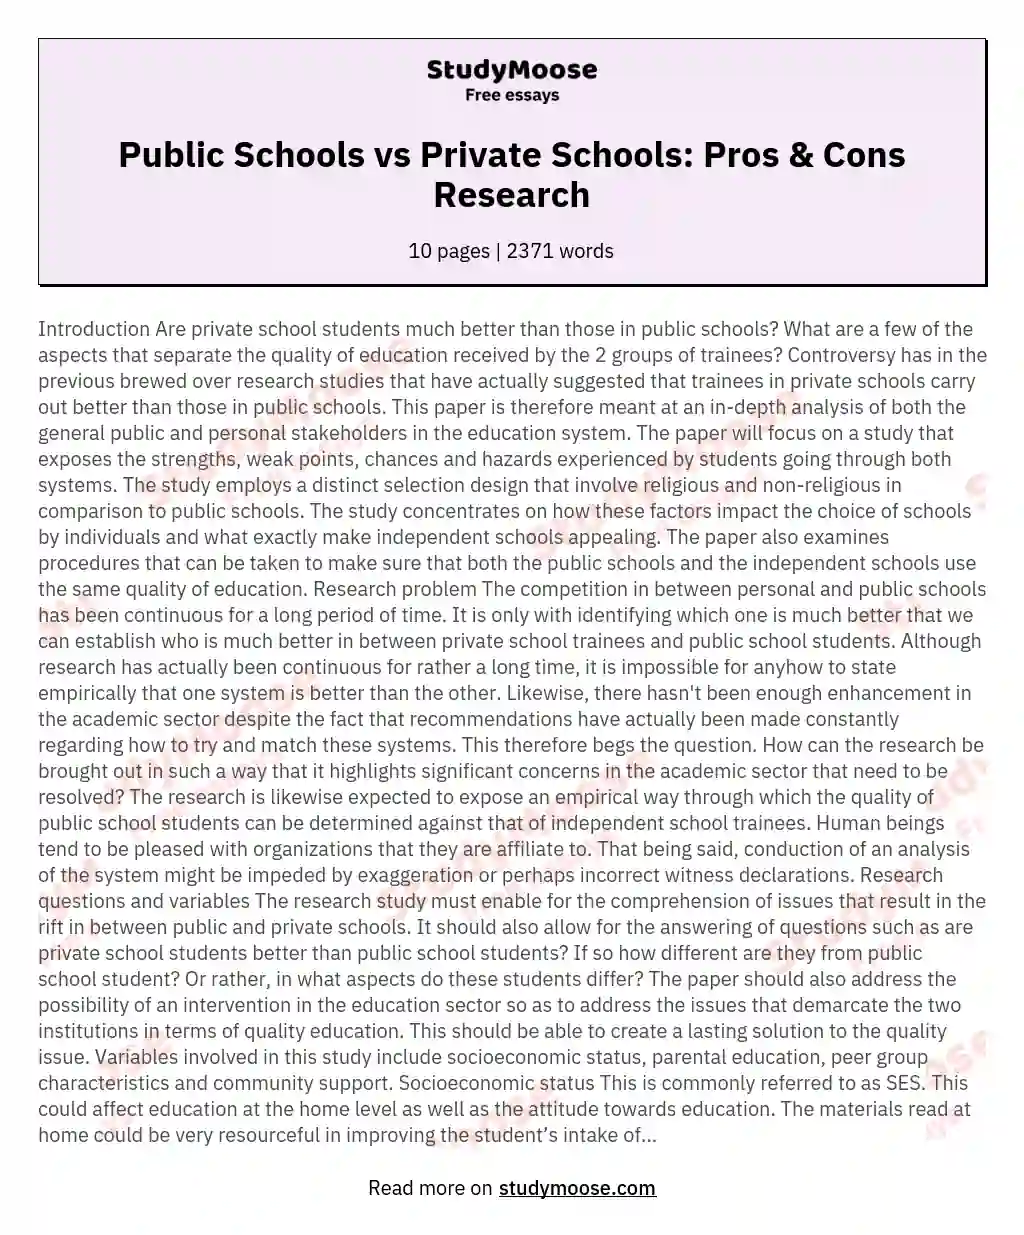 write an argumentative essay on the topic private school is better than public school